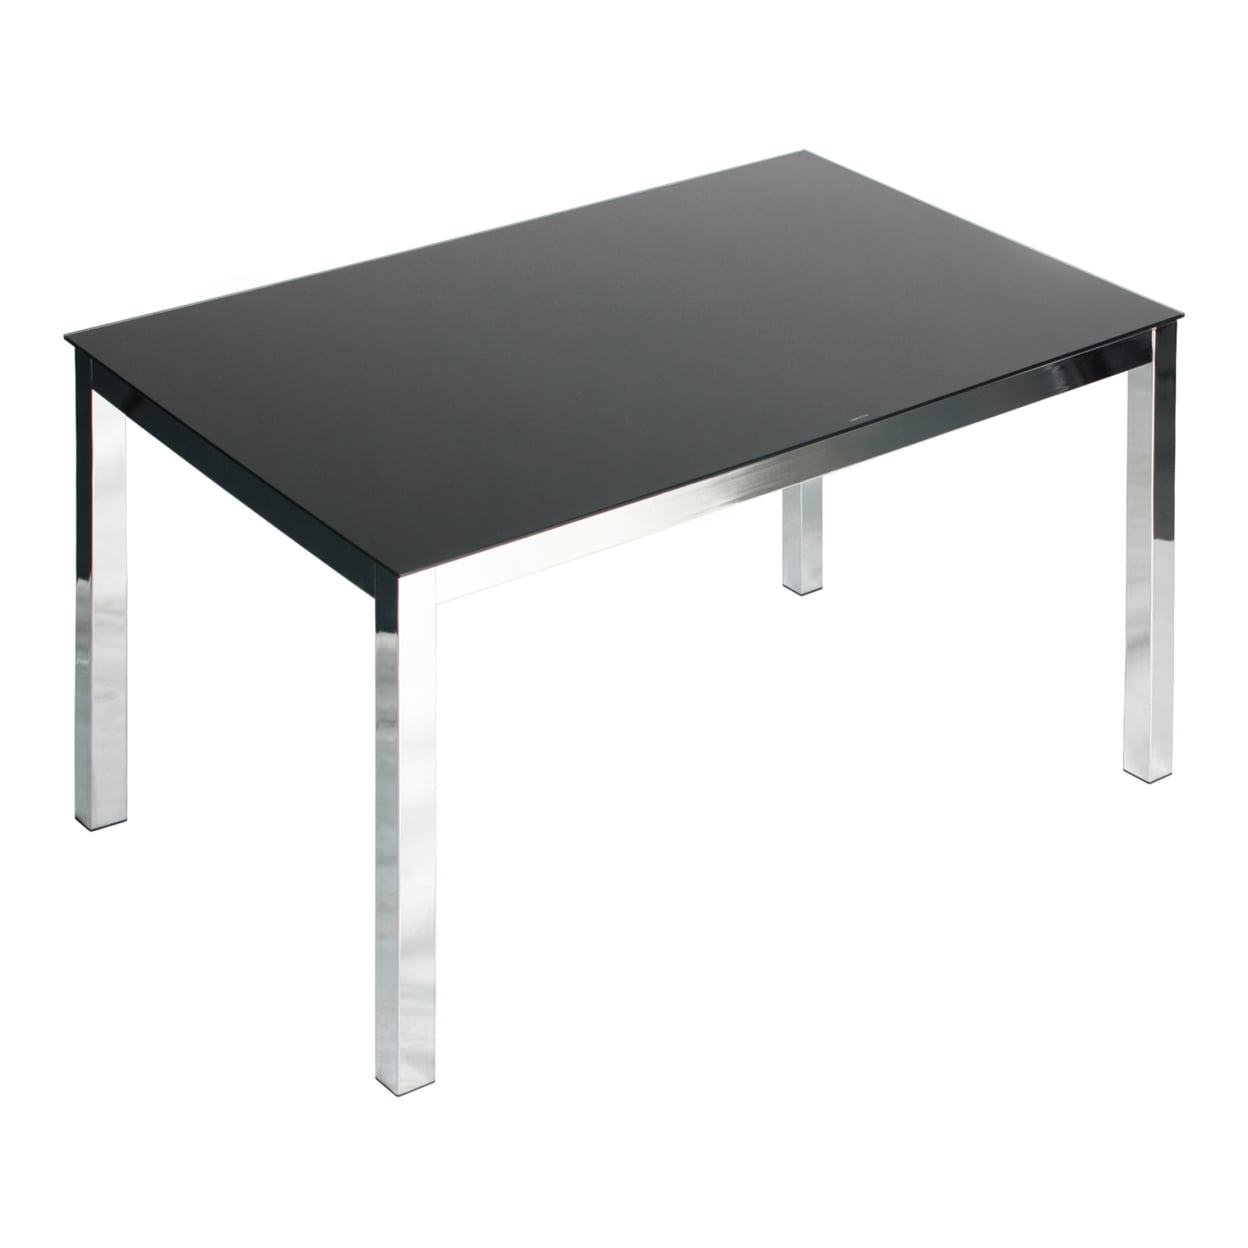 Picture of Better Home MetalChrome-Glass-Blk 29 x 47.25 x 29.5 in. Elliott Chrome Metal Frame Tempered Glass Table, Black